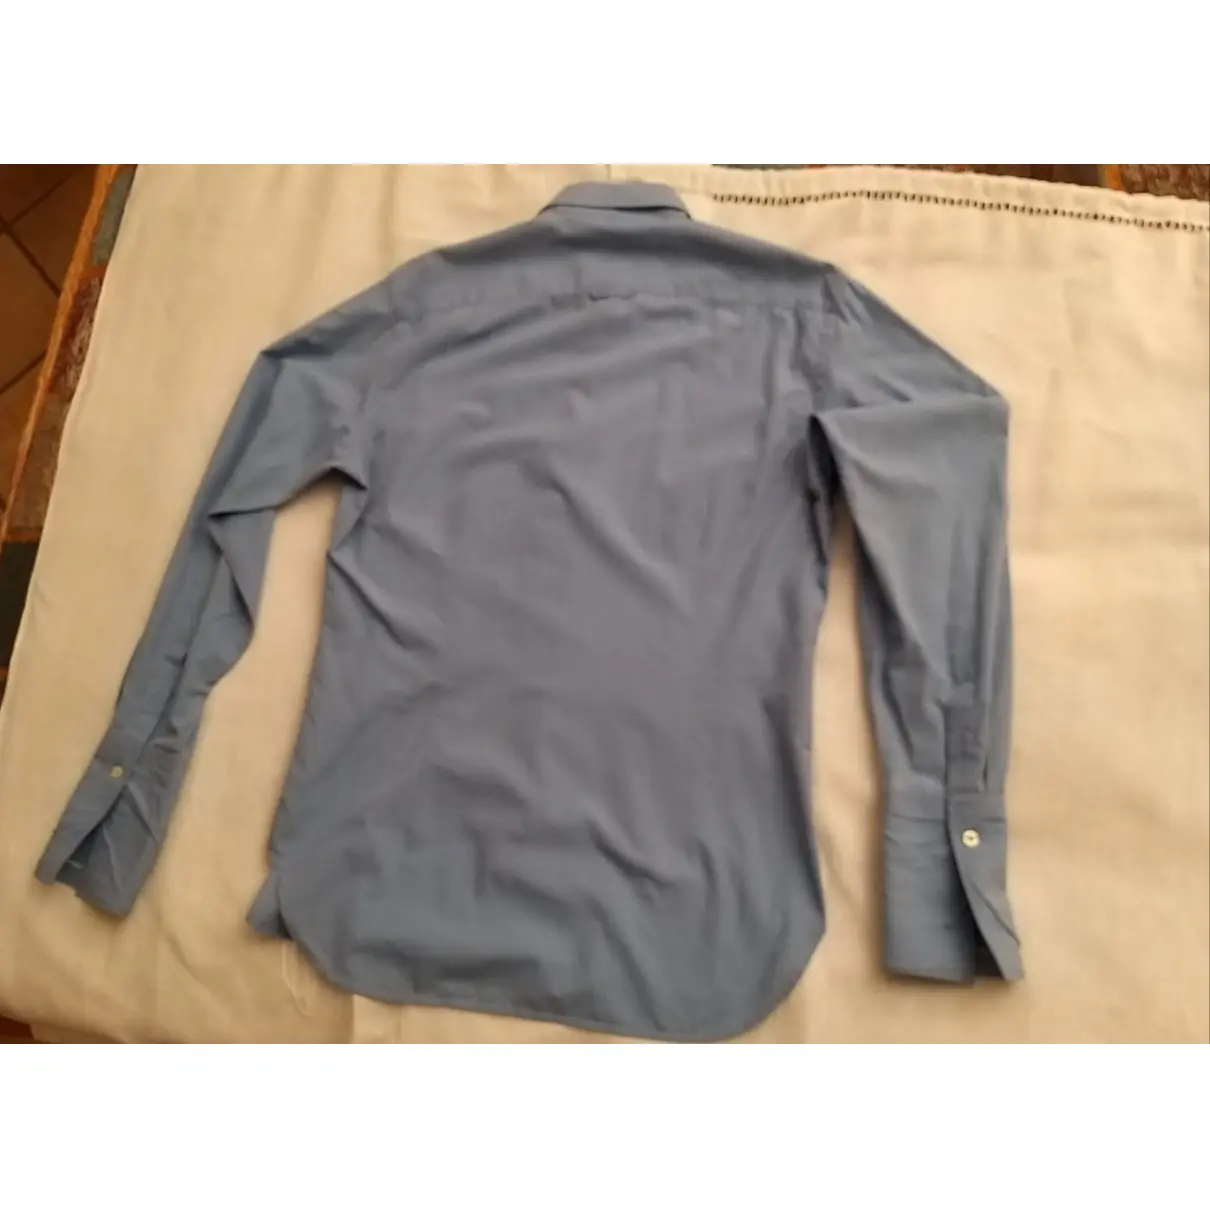 Paul Smith Shirt for sale - Vintage